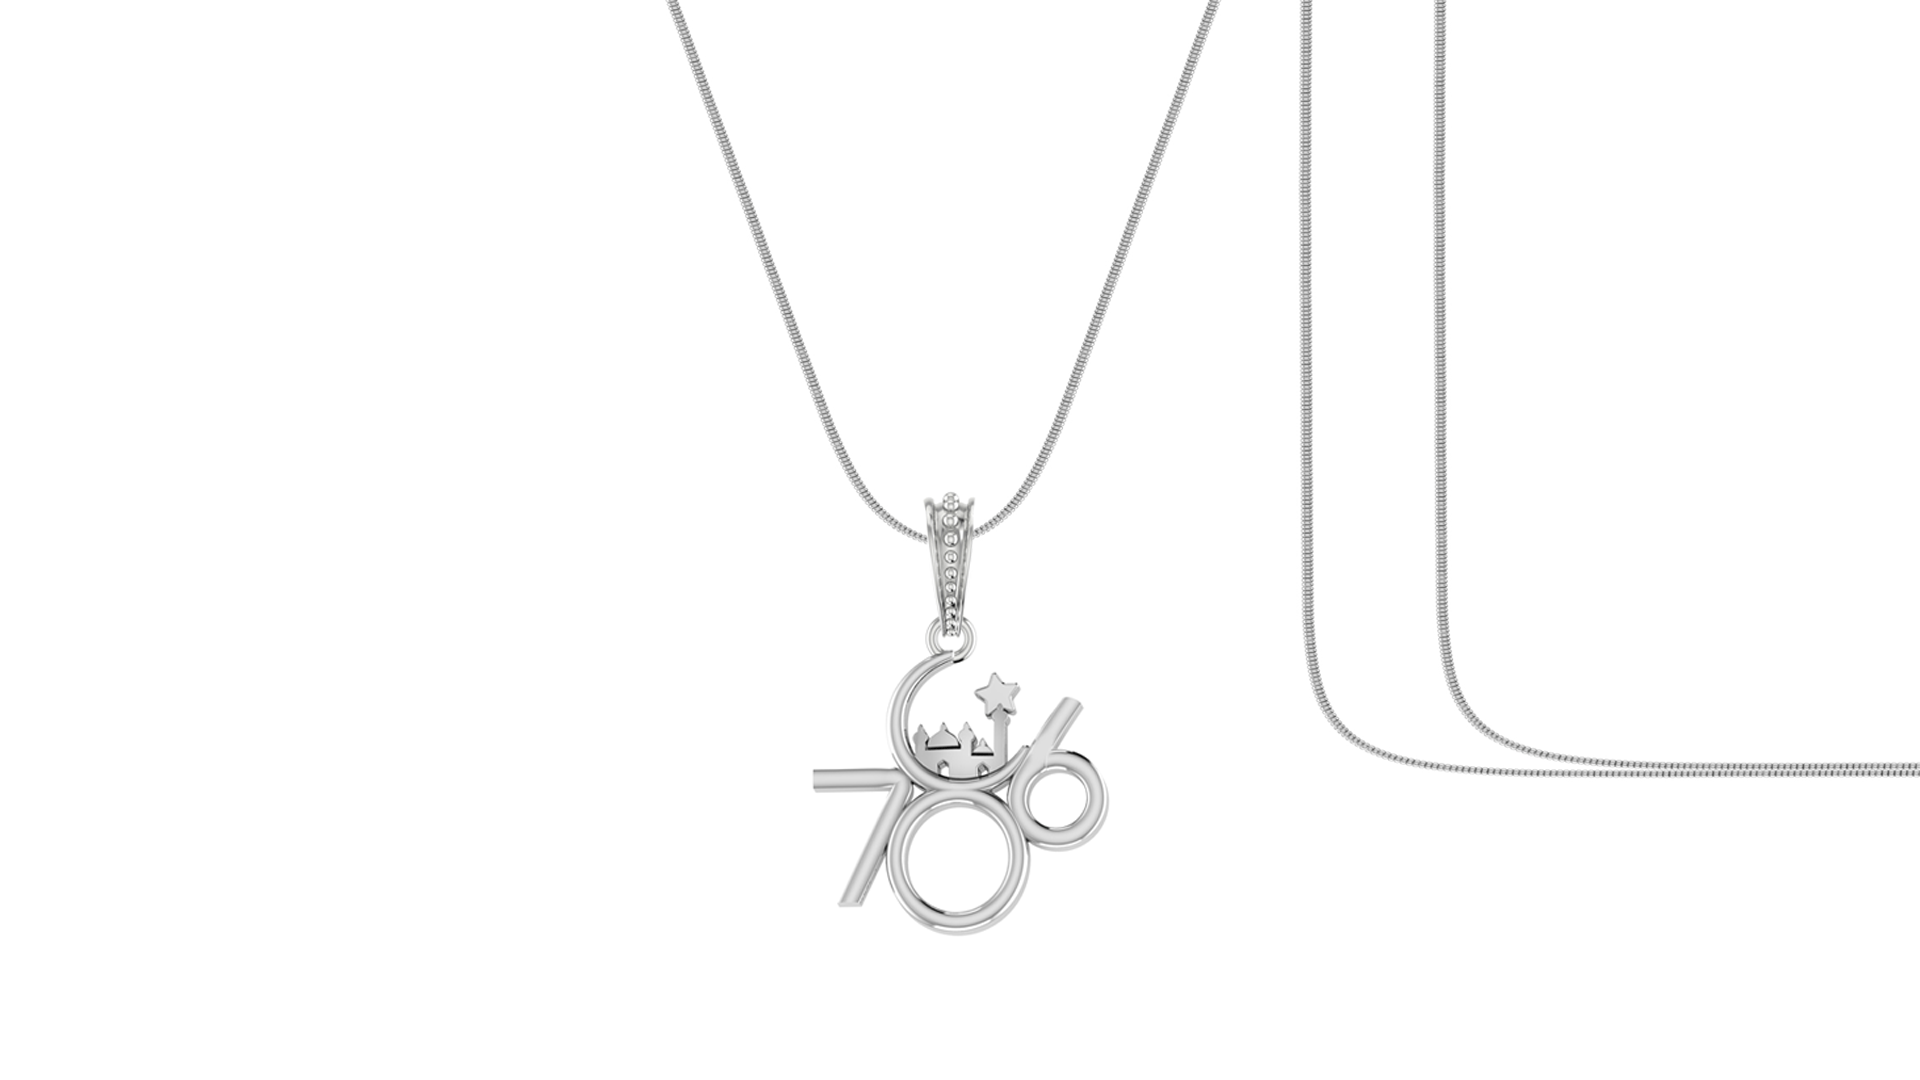 Religious and lucky 786 Chain Pendant (Pendant with Snake Chain-22 inches) for Men and women Pure Silver Muslim spiritual 786 Chain Locket for Good Luck, Health & Wealth